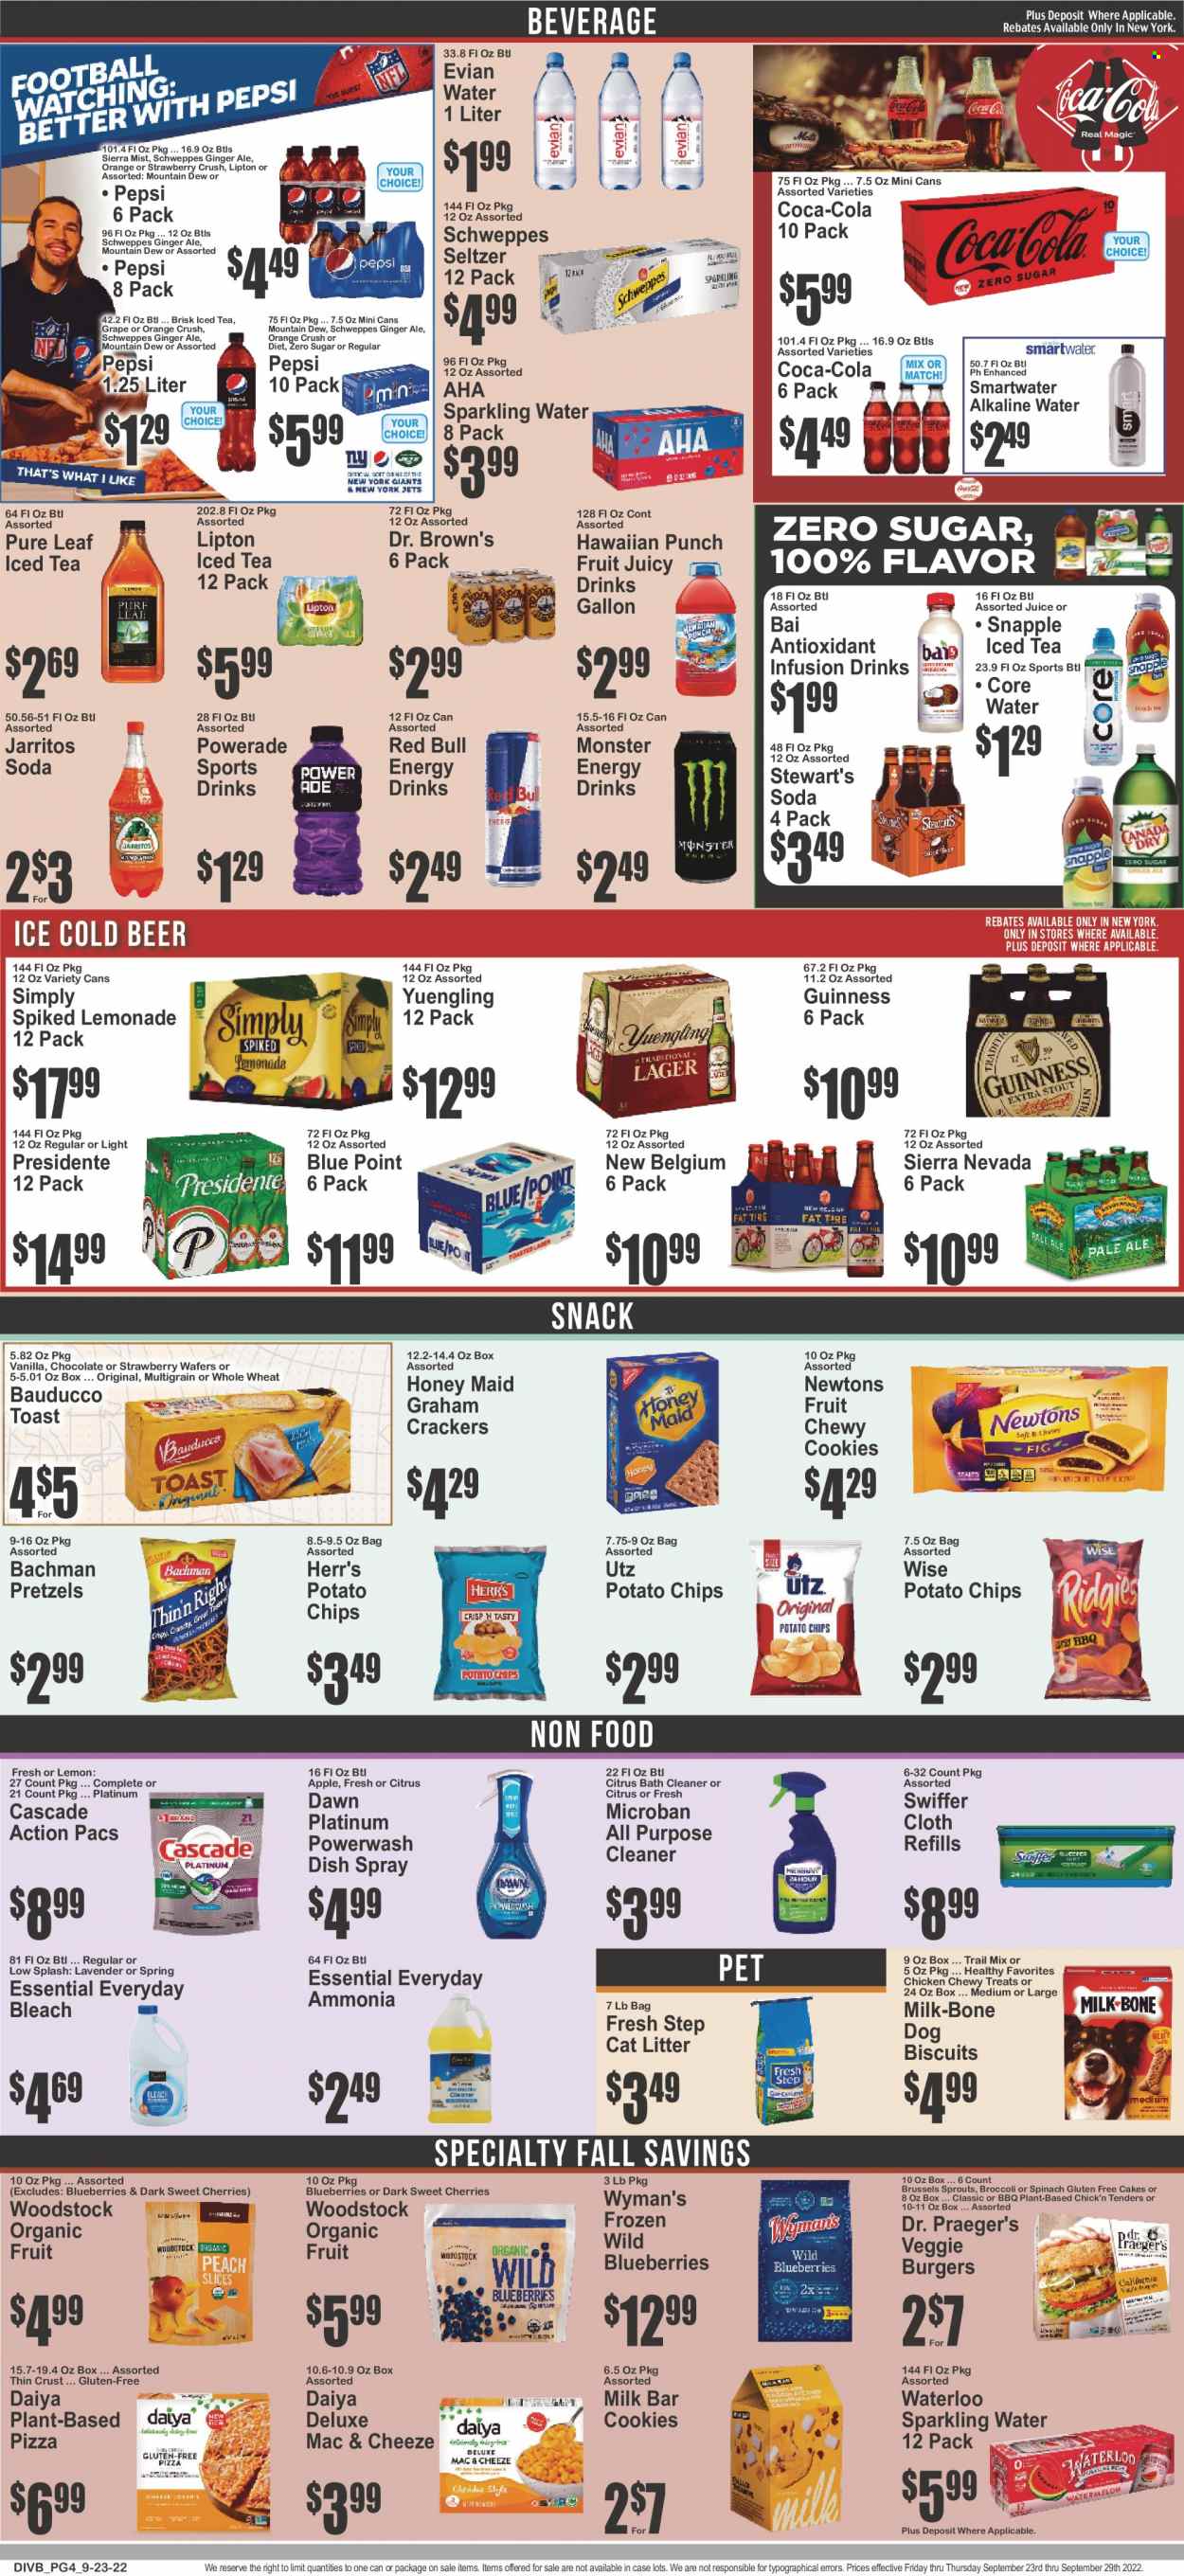 thumbnail - Food Universe Flyer - 09/23/2022 - 09/29/2022 - Sales products - pretzels, cake, broccoli, brussel sprouts, blueberries, oranges, pizza, veggie burger, cookies, graham crackers, wafers, chocolate, snack, crackers, Milkybar, potato chips, Honey Maid, trail mix, Coca-Cola, ginger ale, lemonade, Mountain Dew, Schweppes, Powerade, Pepsi, juice, energy drink, Monster, Lipton, ice tea, Red Bull, Monster Energy, Snapple, Dr. Brown's, Sierra Mist, Bai, seltzer water, soda, sparkling water, Smartwater, alkaline water, Evian, Pure Leaf, beer, Guinness, cleaner, bleach, all purpose cleaner, Swiffer, Cascade, cat litter, animal treats, dog food, dog biscuits, Fresh Step, Yuengling. Page 4.